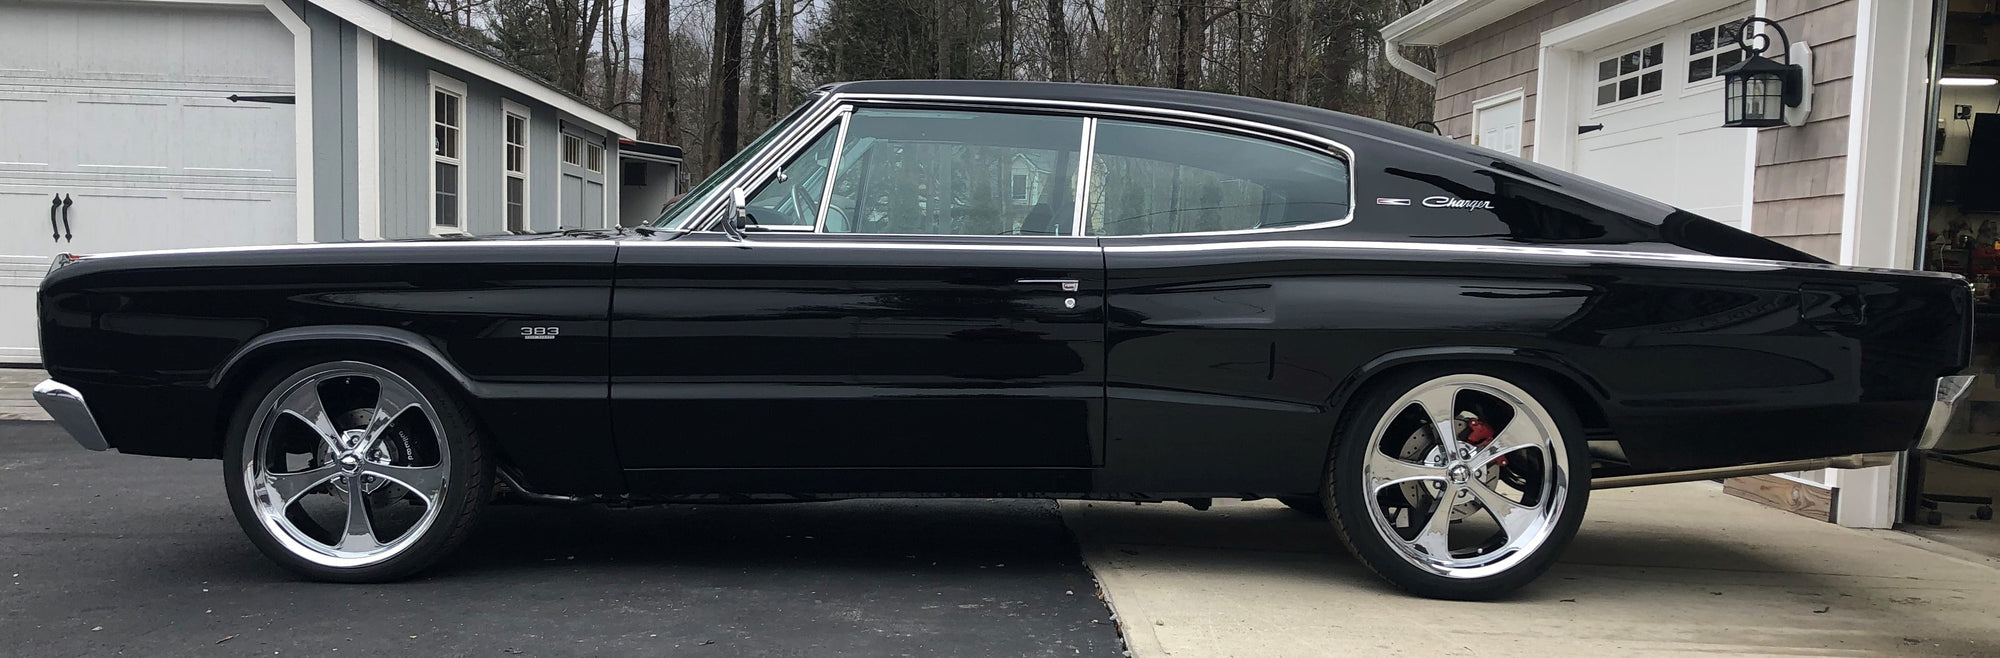 67 Charger Project Rolling Outside For some Fresh Air